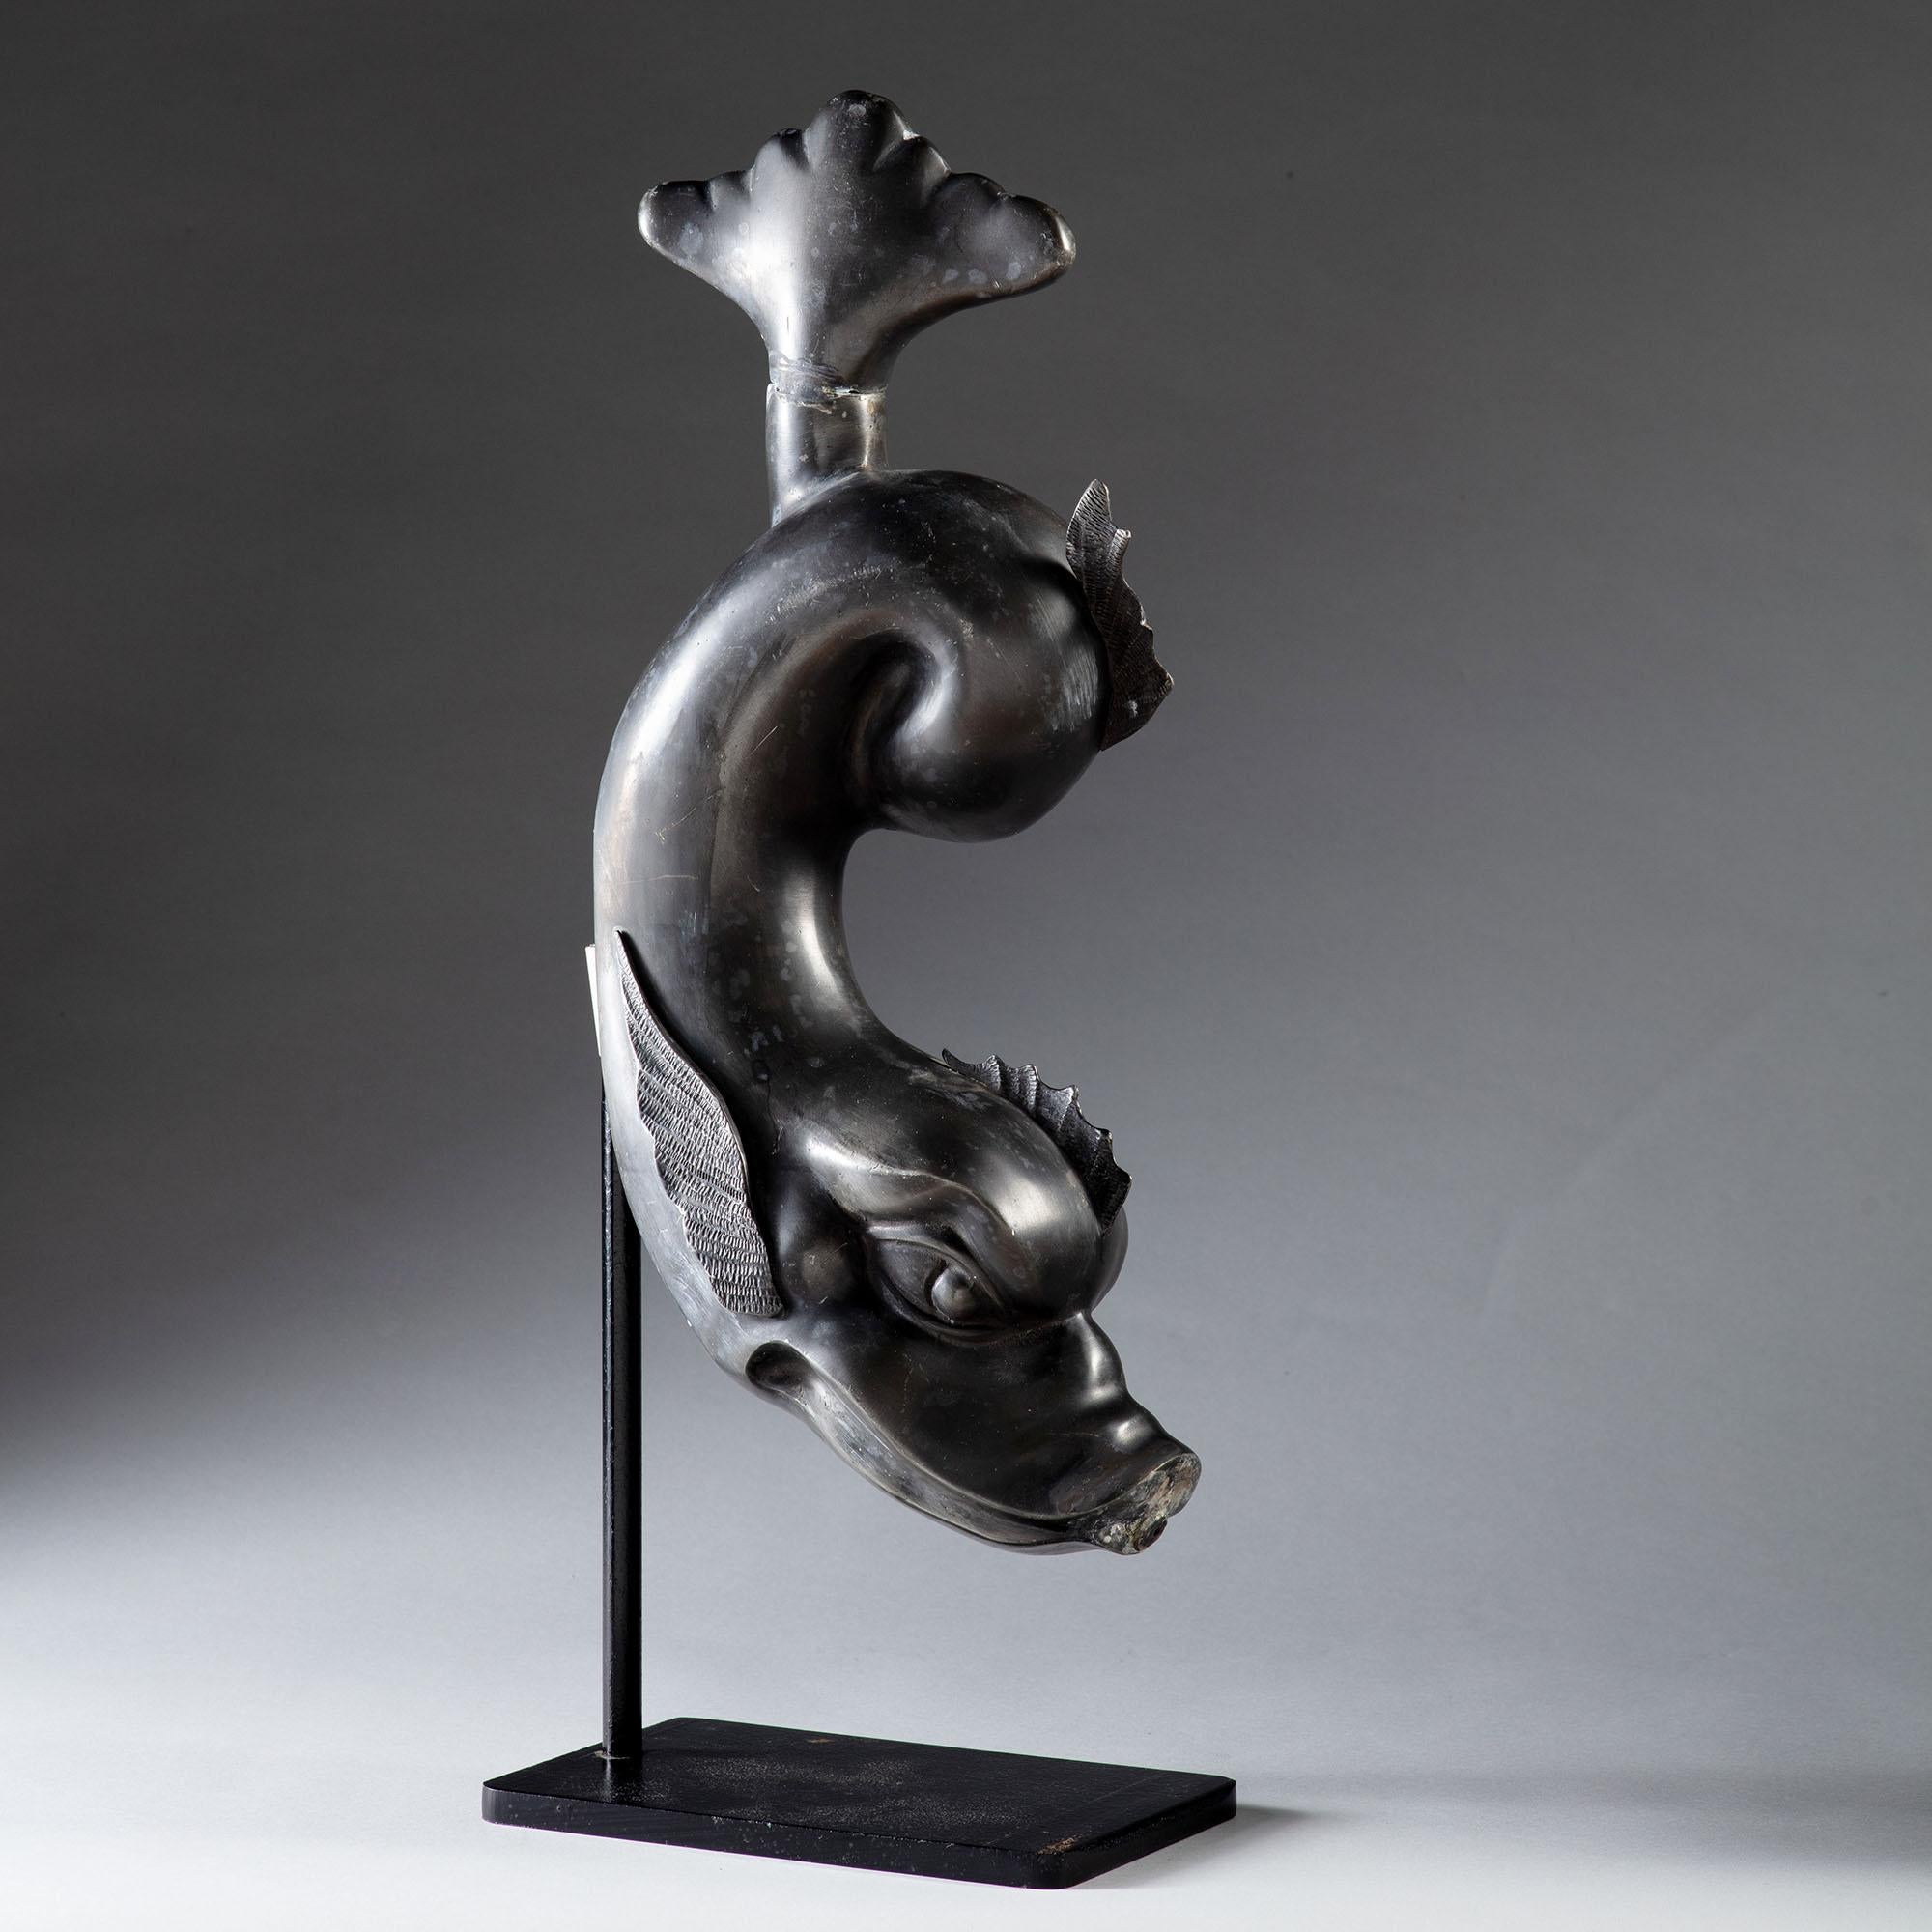 A mid-19th century lead dolphin spout, with twisted tail and finely detailed fins, now mounted on a cast iron stand.